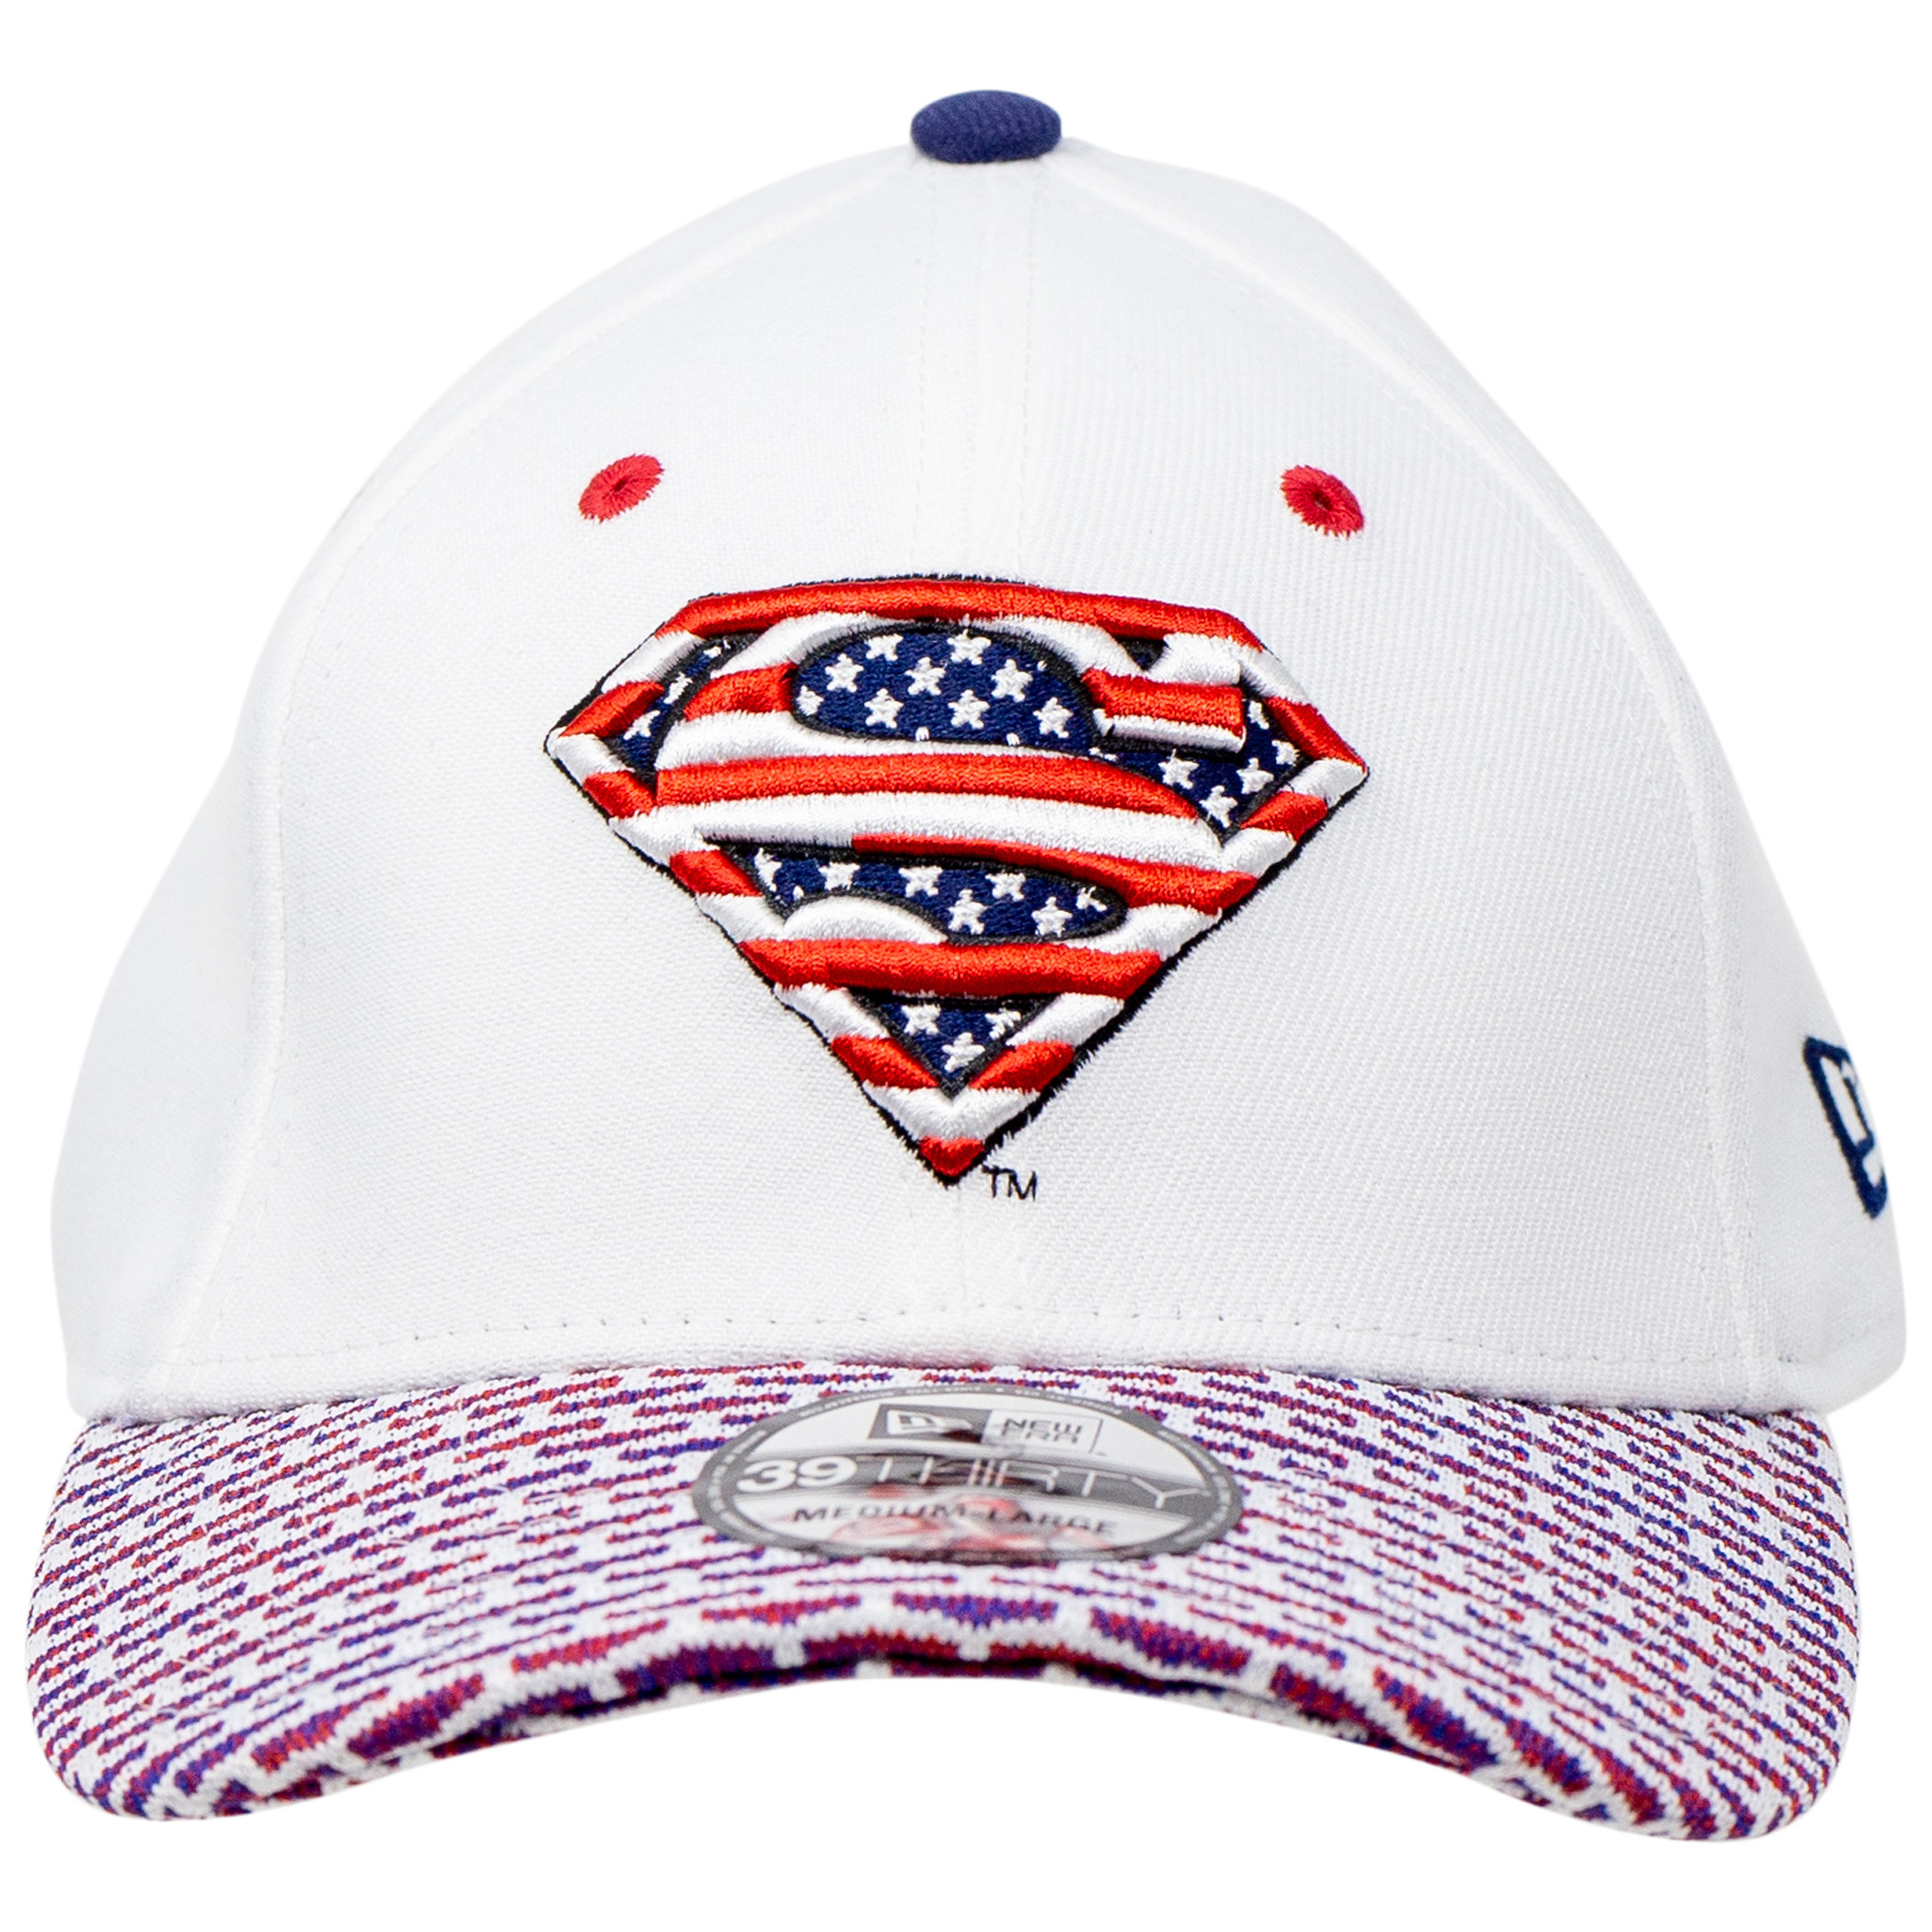 Superman Red White and Blue Themed New Era 39Thirty Fitted Hat